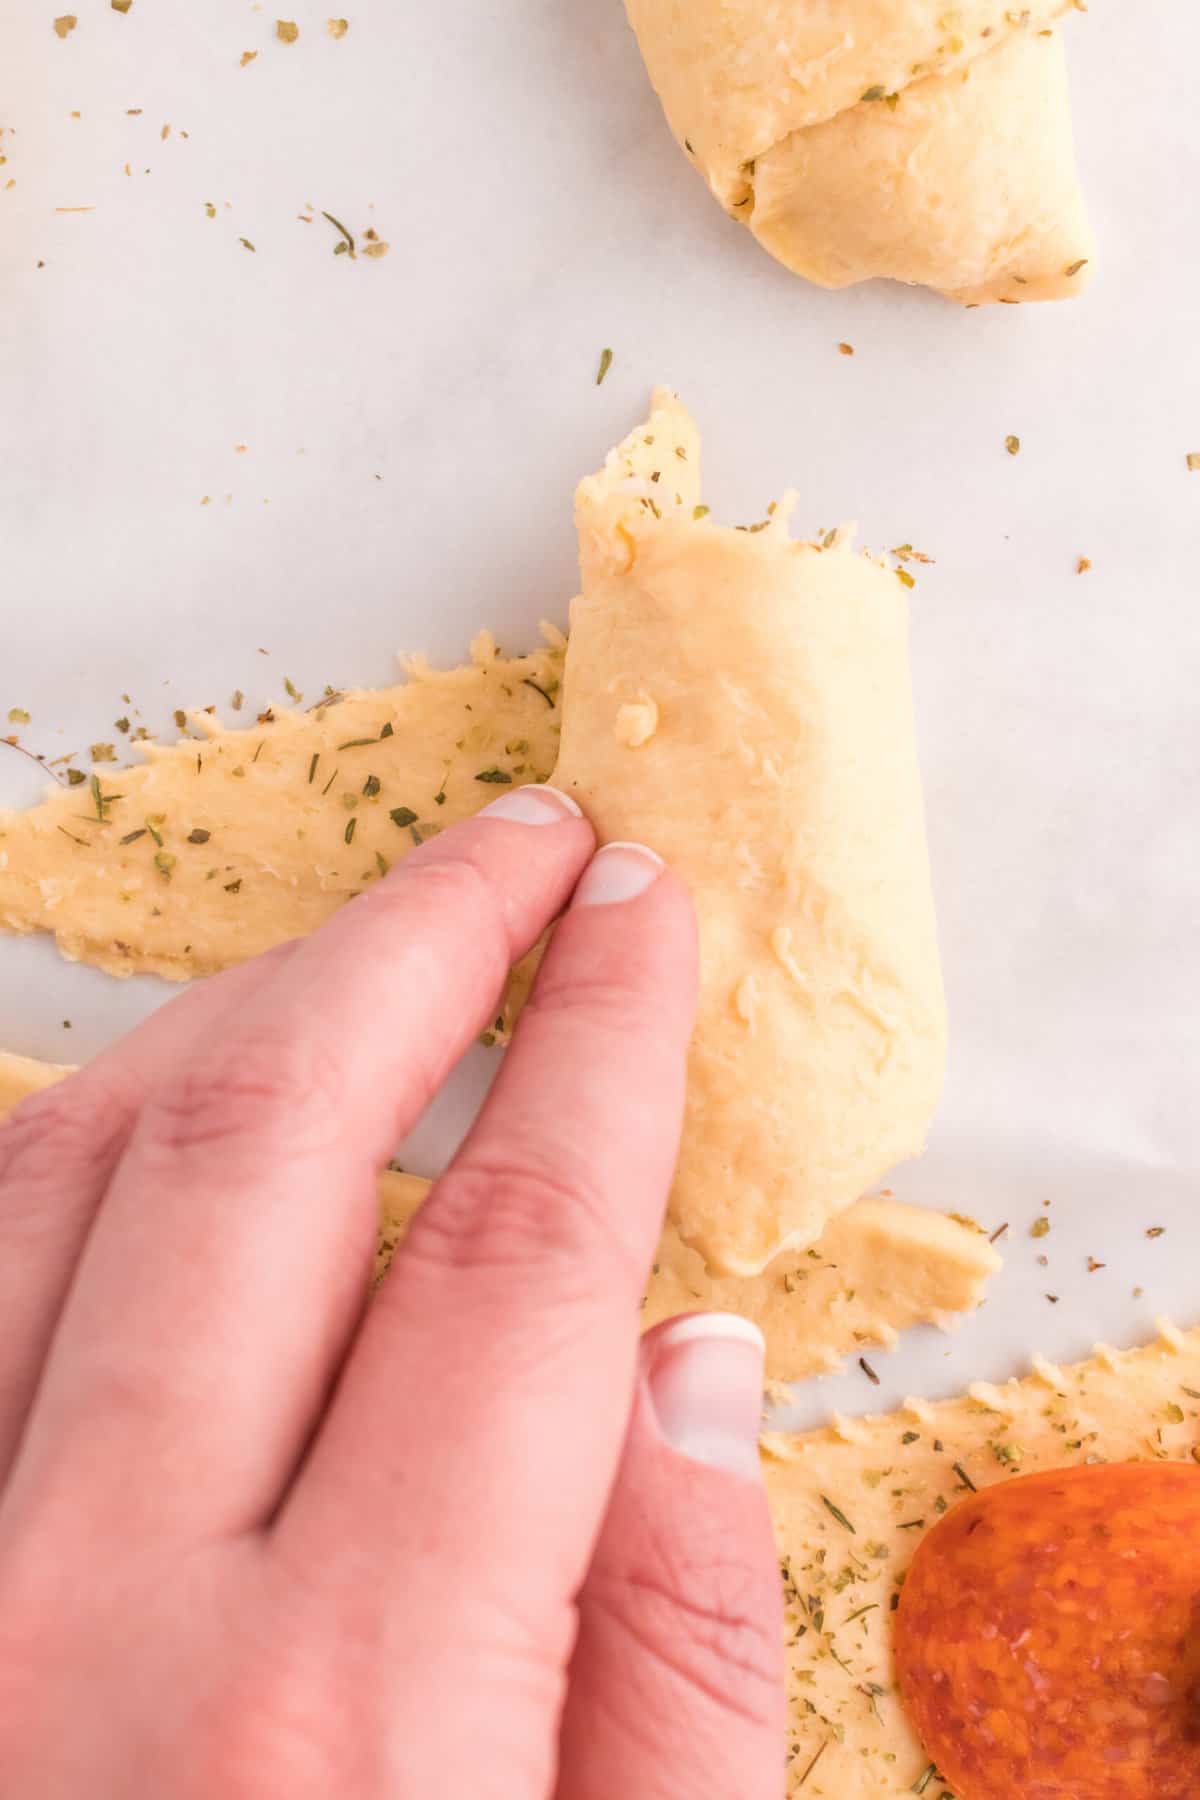 Starting at the widest part of the crescent roll start rolling towards the end and seal the edges together.